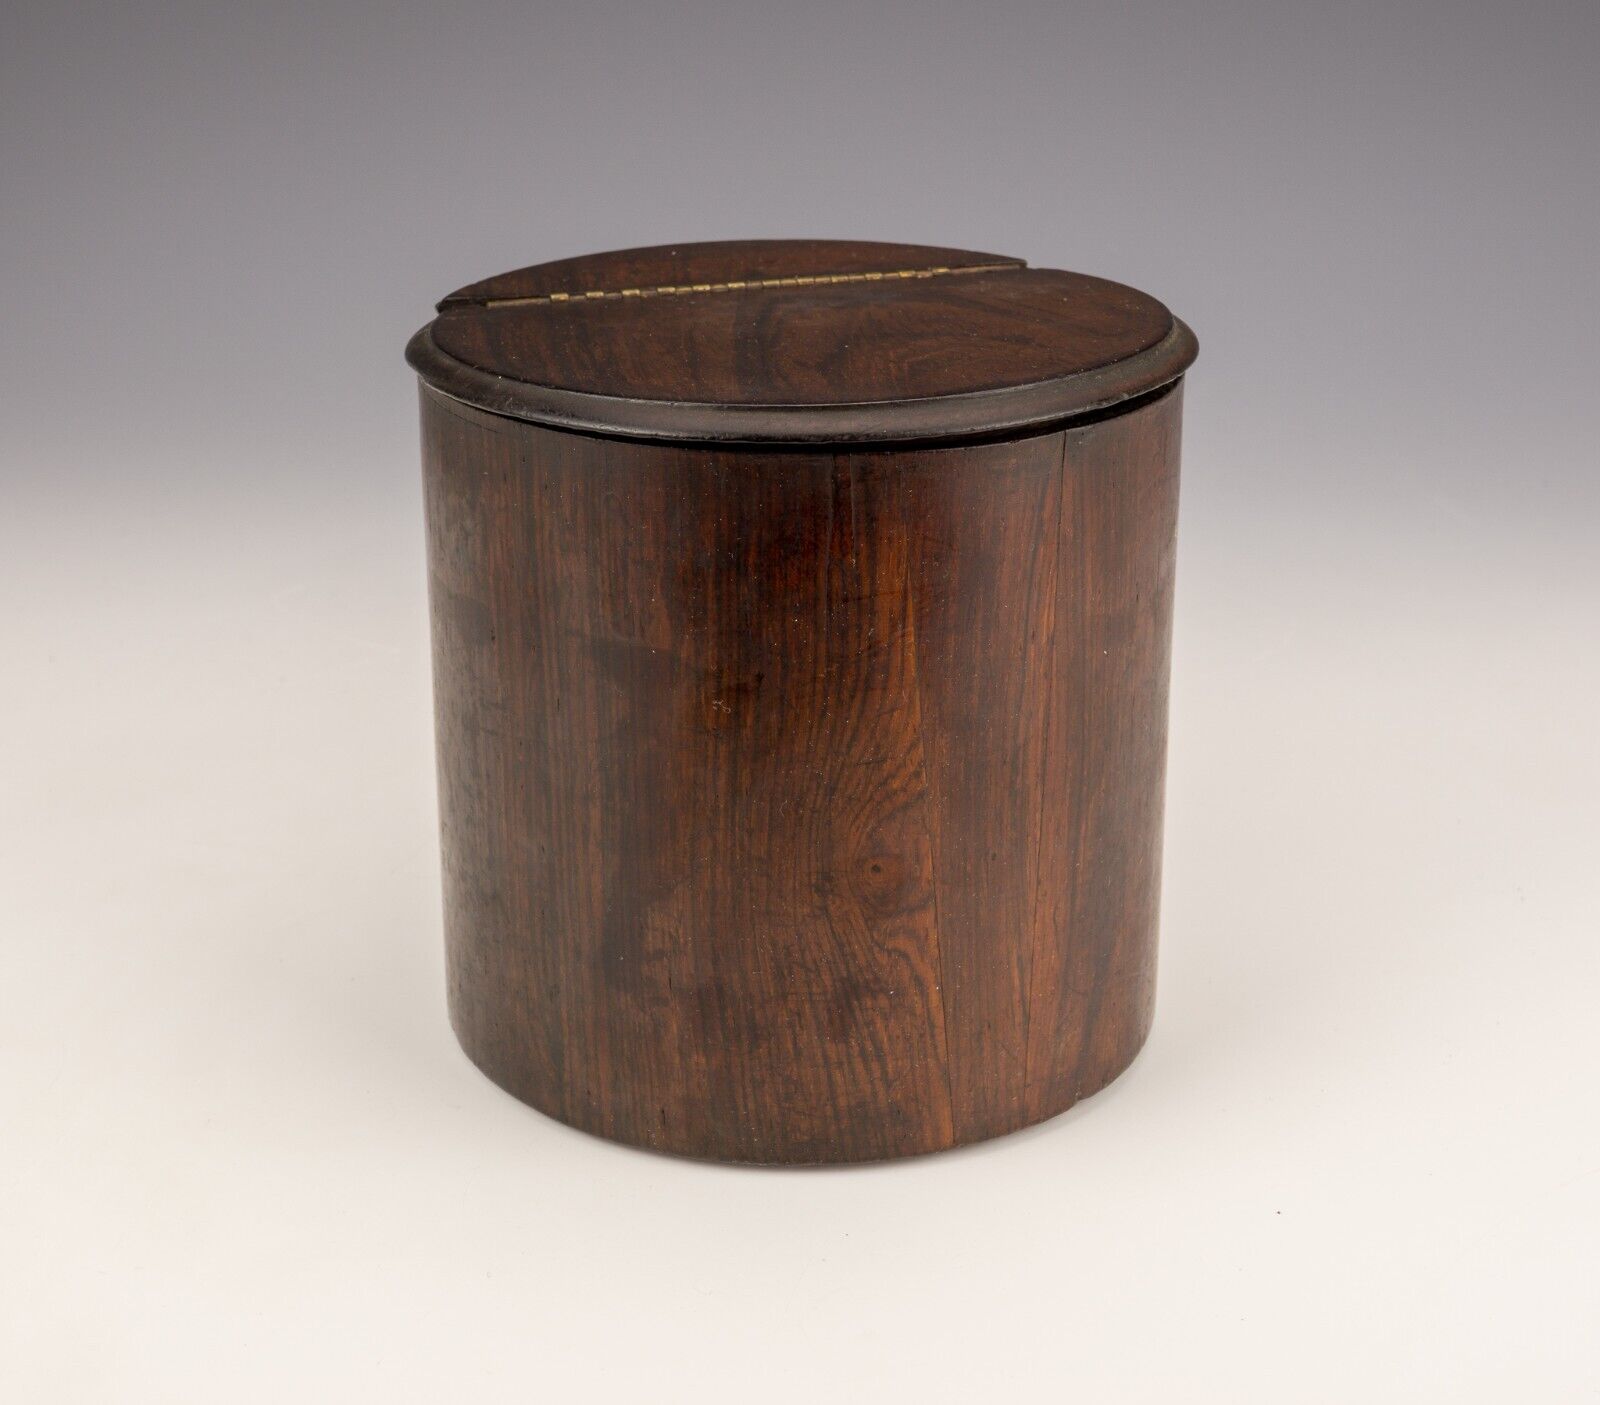 Antique Rosewood Tea Caddy - Early!